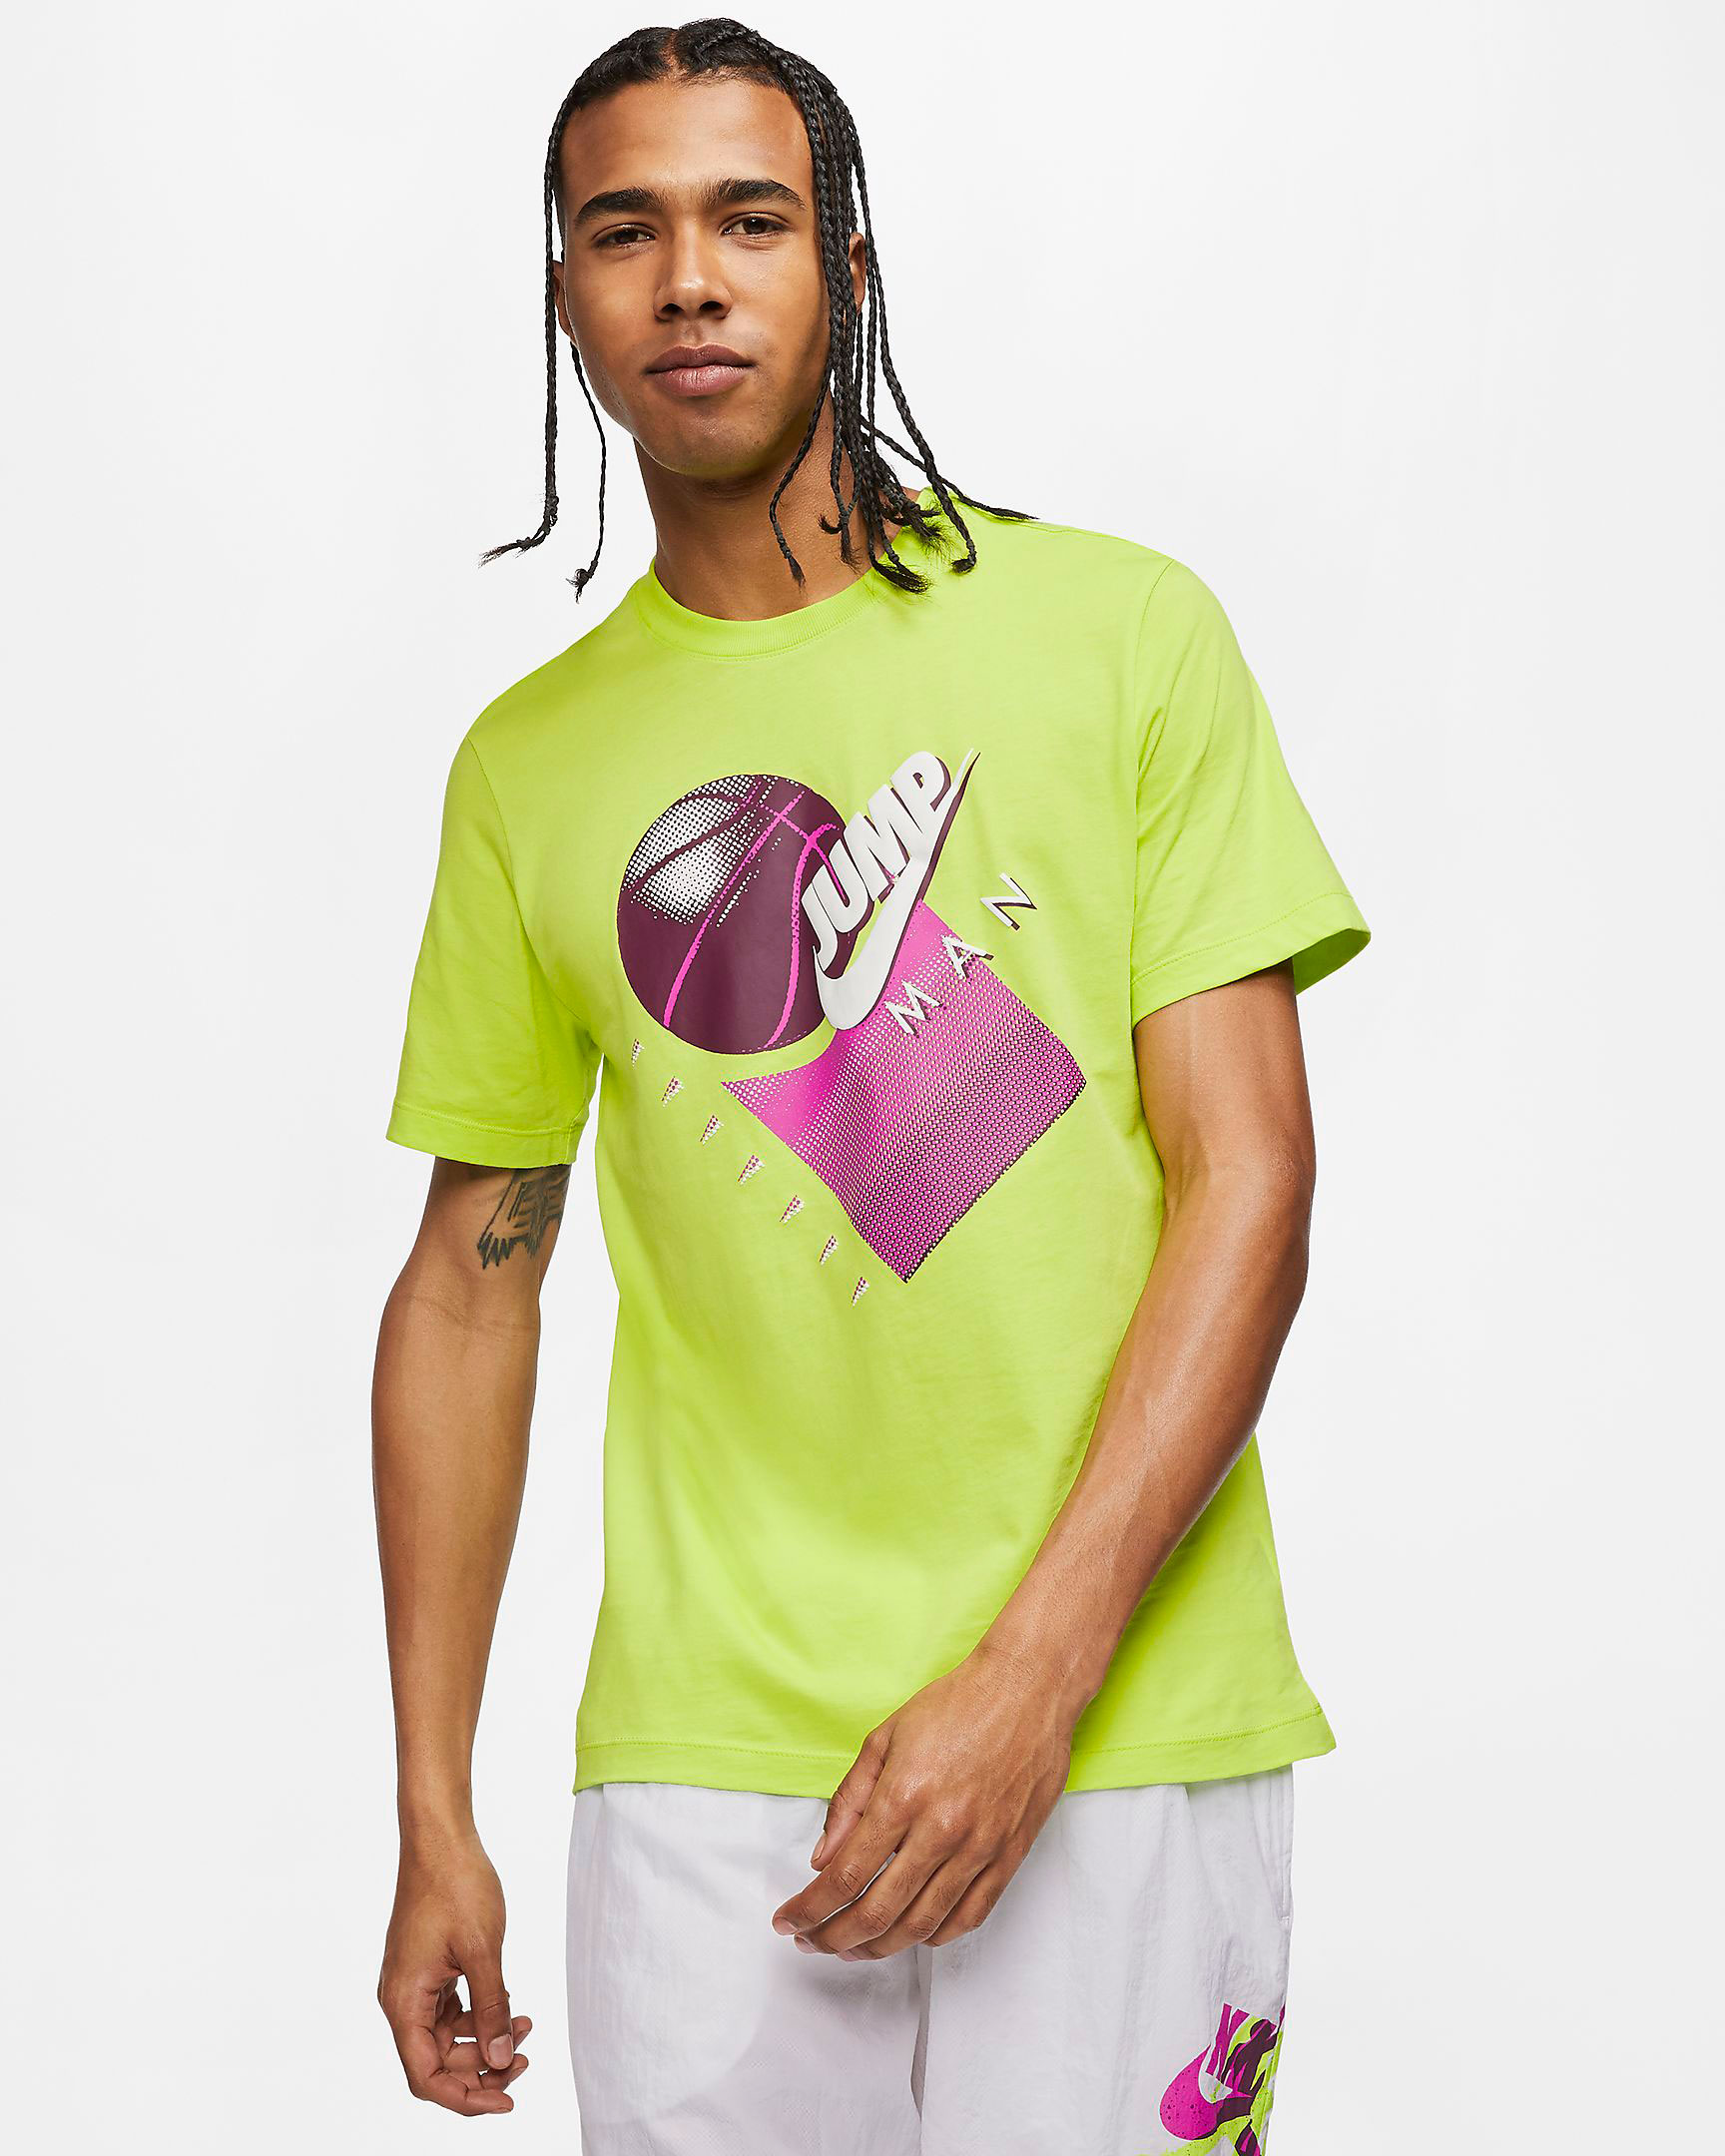 shirts that match the bel air 5s